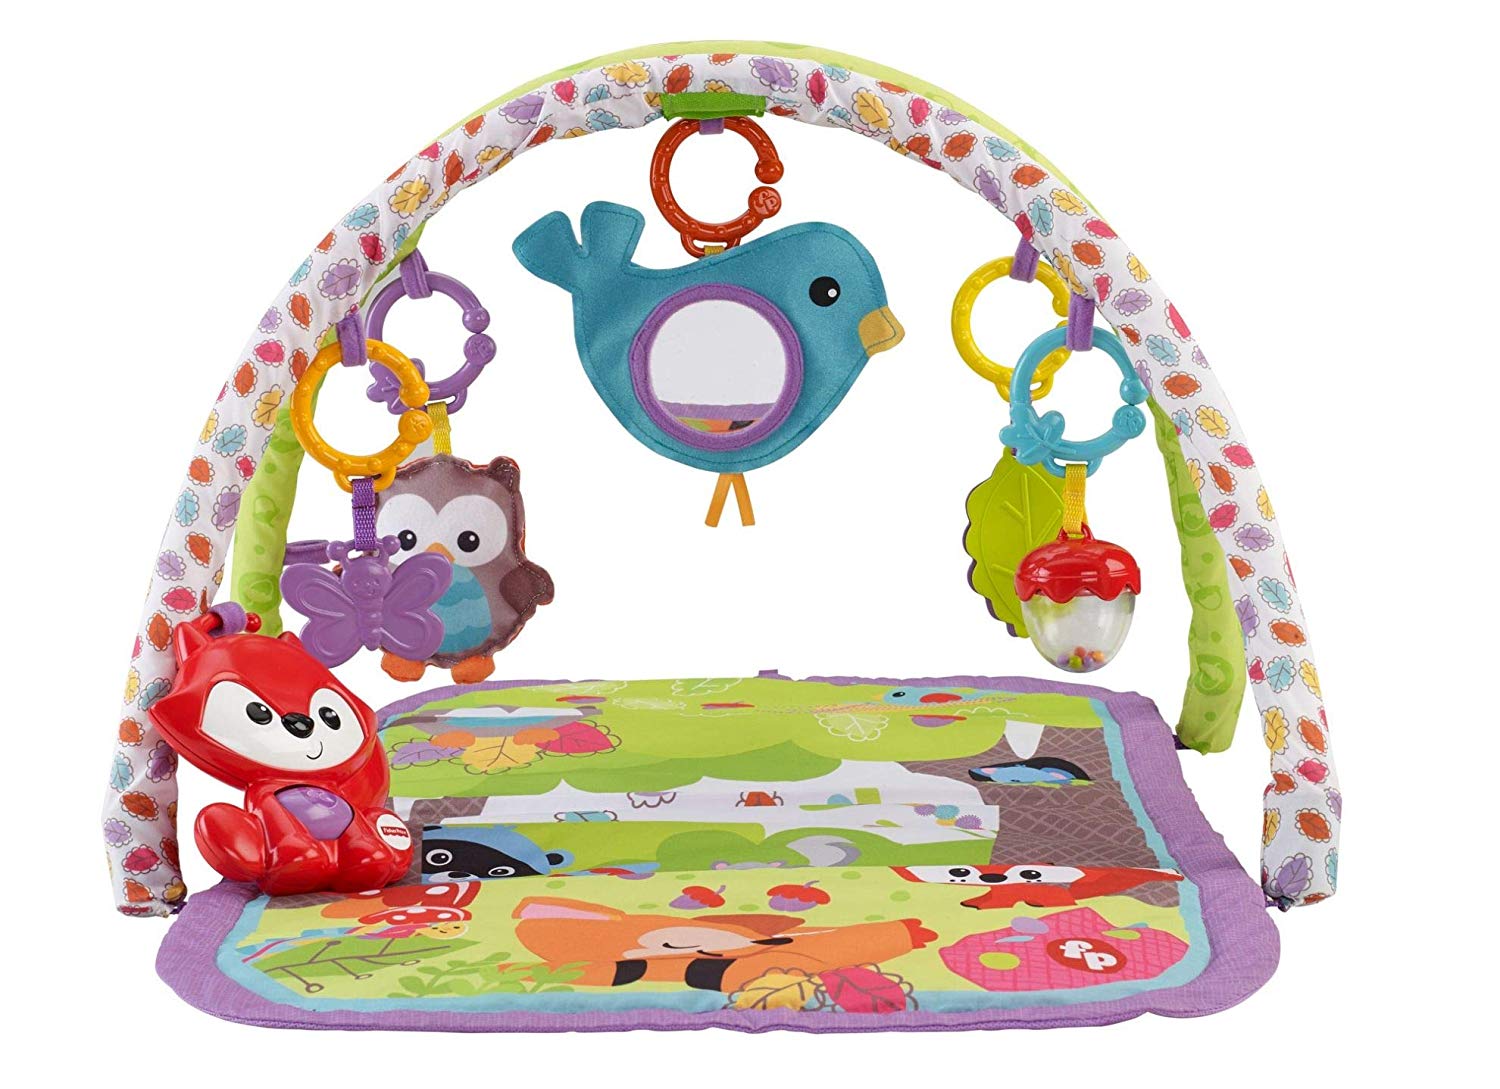 Fisher Price Cdn47 Woodland Friends 3 In 1 Play Mat, Multi-Colour